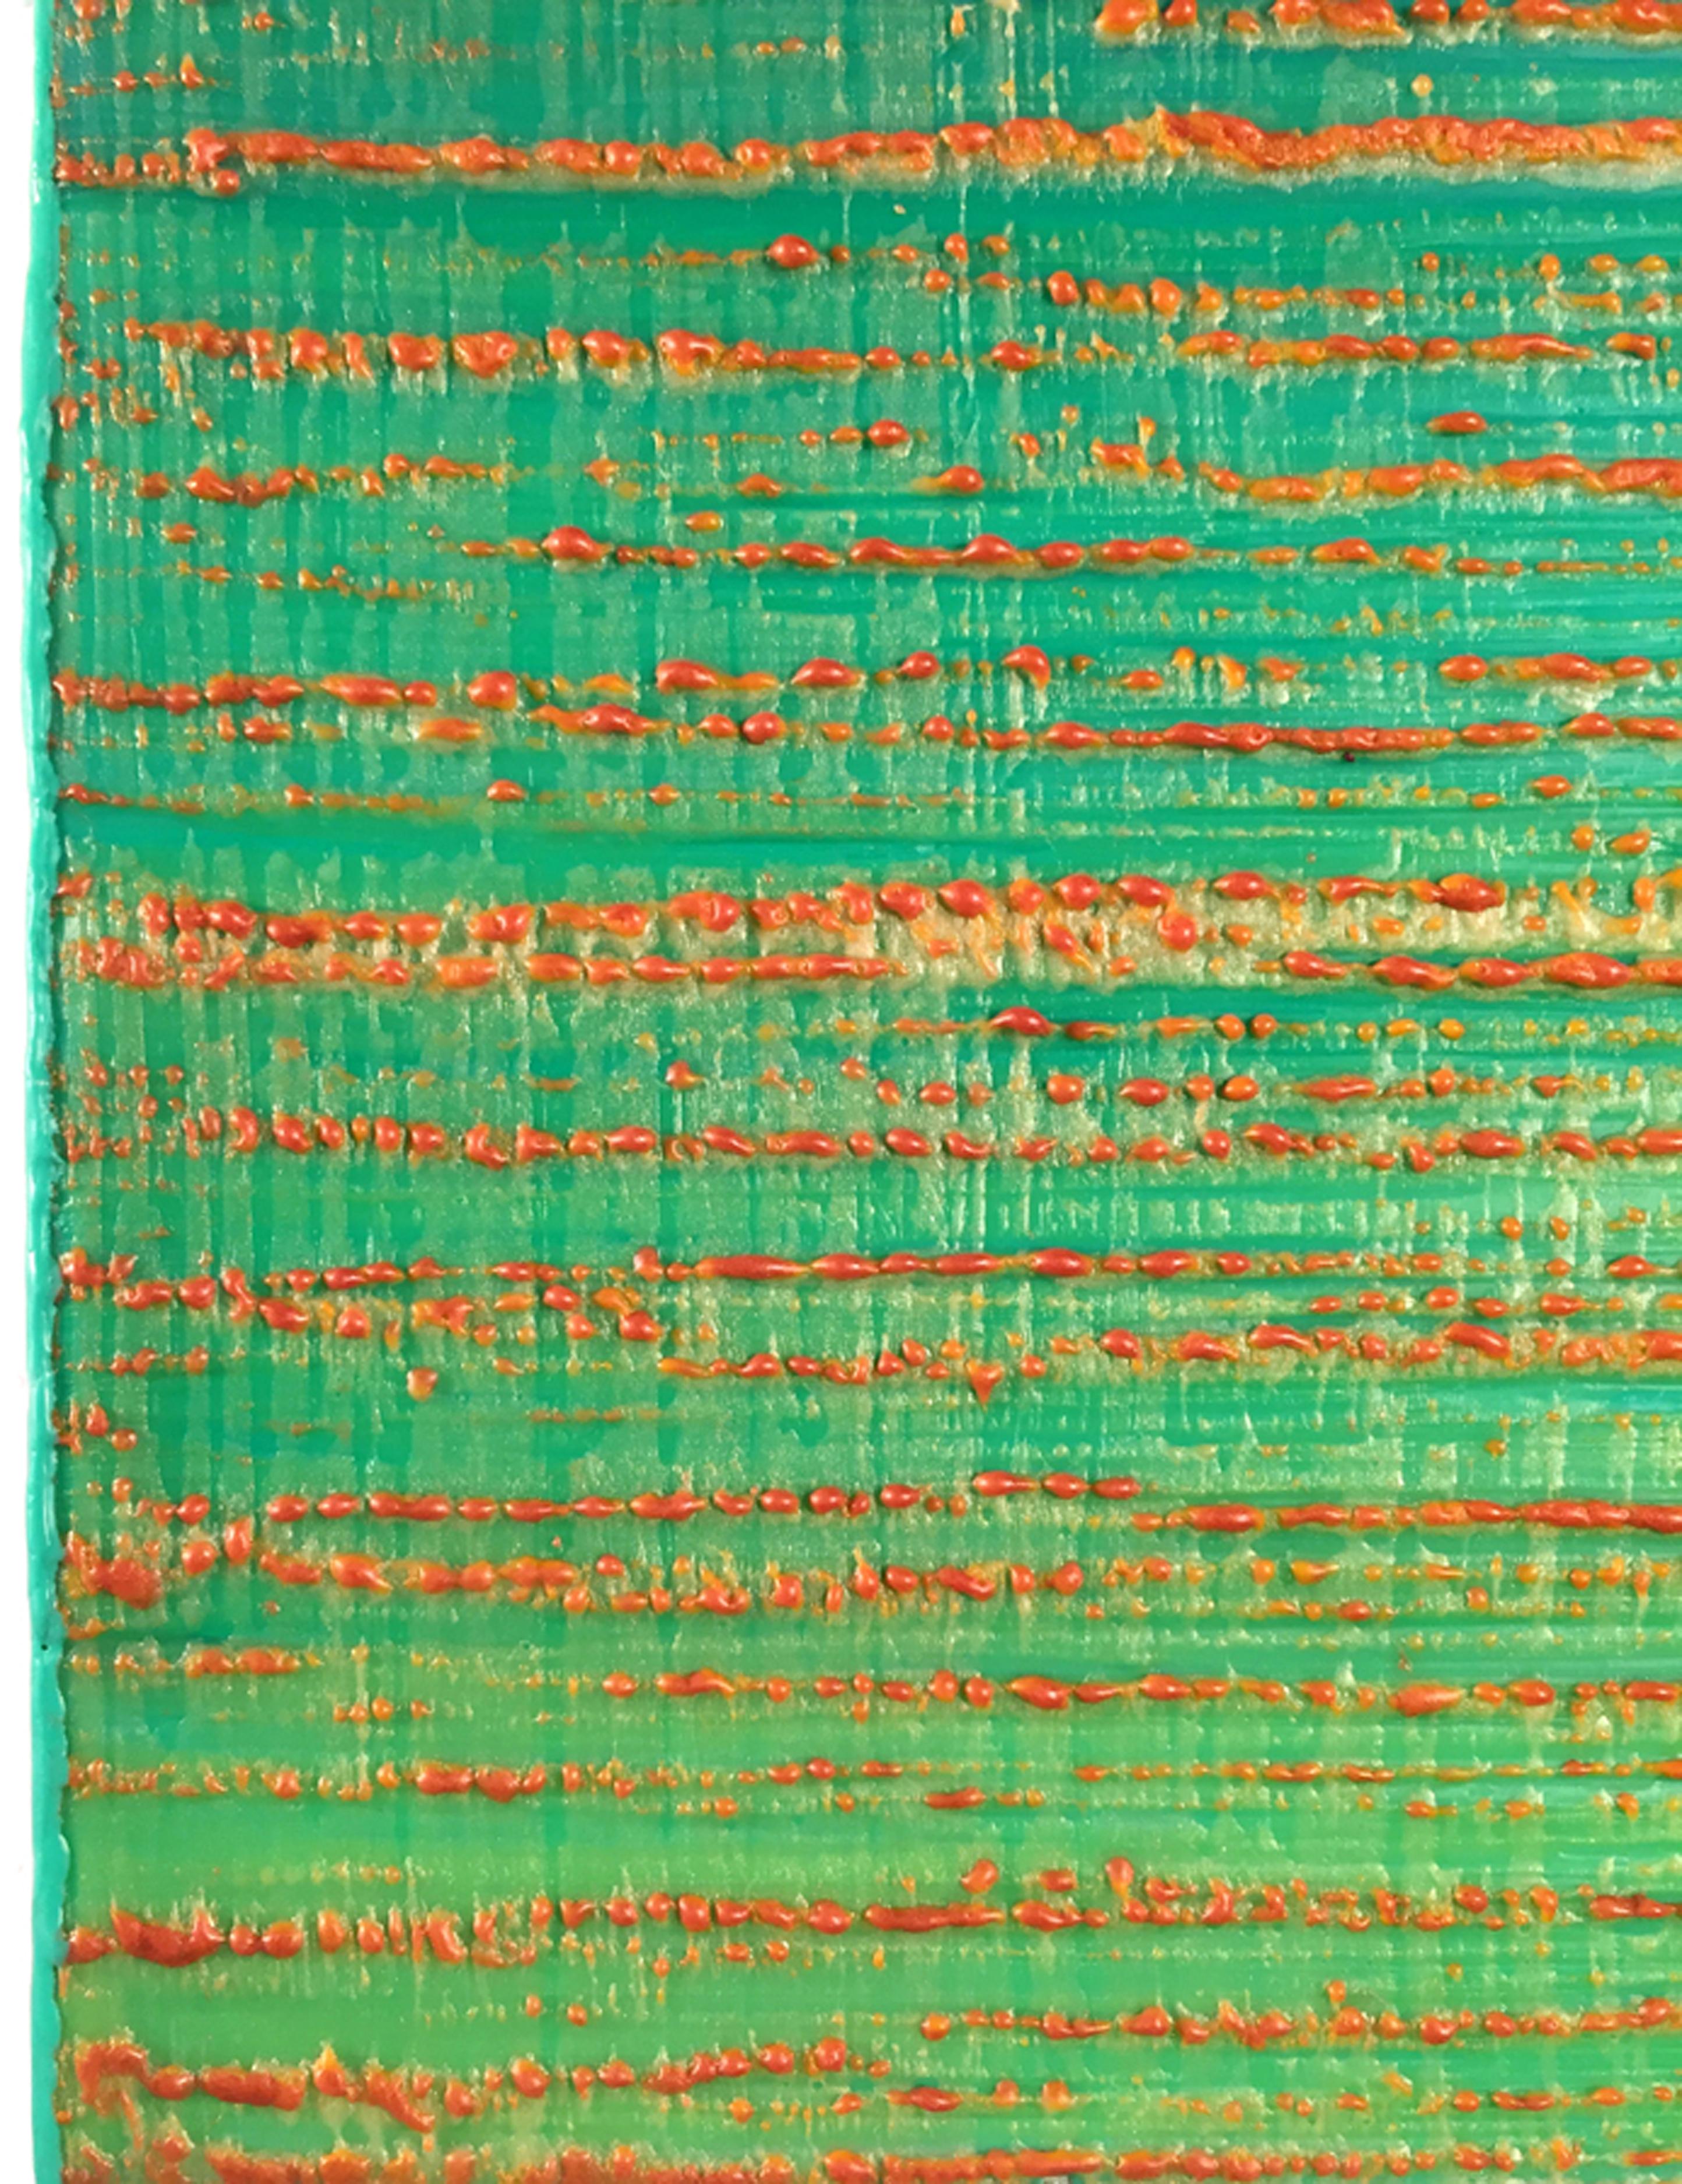 Silk Road 449, 2019, encaustic on panel, 12 x 12 x 2 inches - Painting by Joanne Mattera